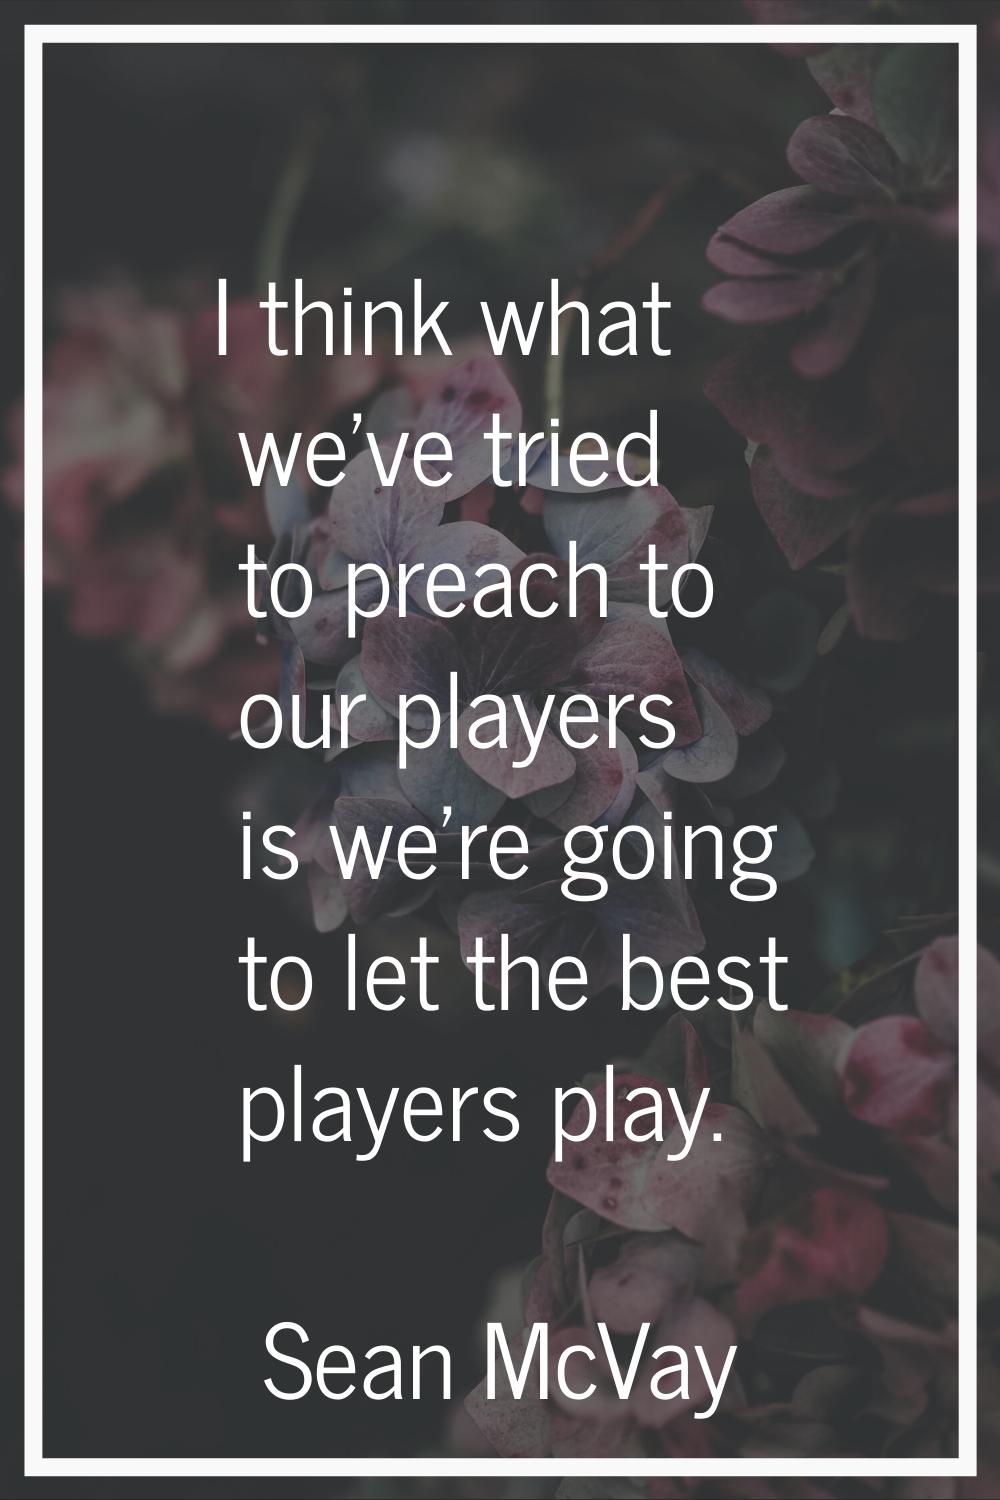 I think what we've tried to preach to our players is we're going to let the best players play.